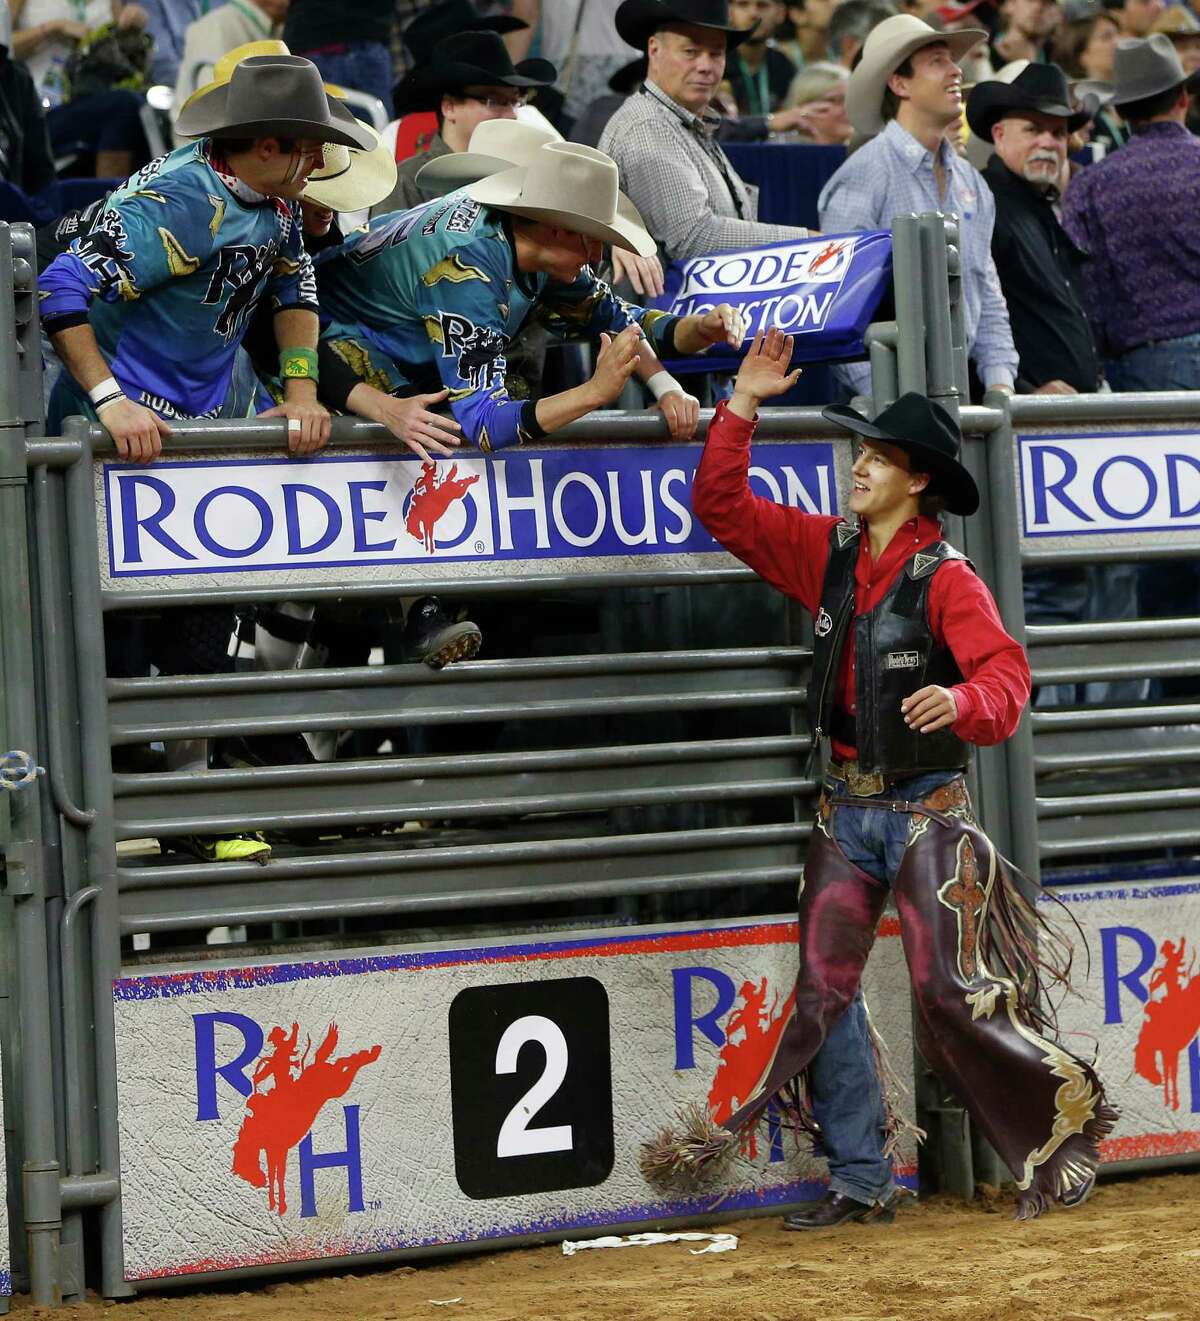 Saddle bronc rider Zeke Thurston, bull rider Sage Kimzey and barrel racer Nancy Hunter, from left, were pumped up after winning Saturday's championship shootout in their respective events.